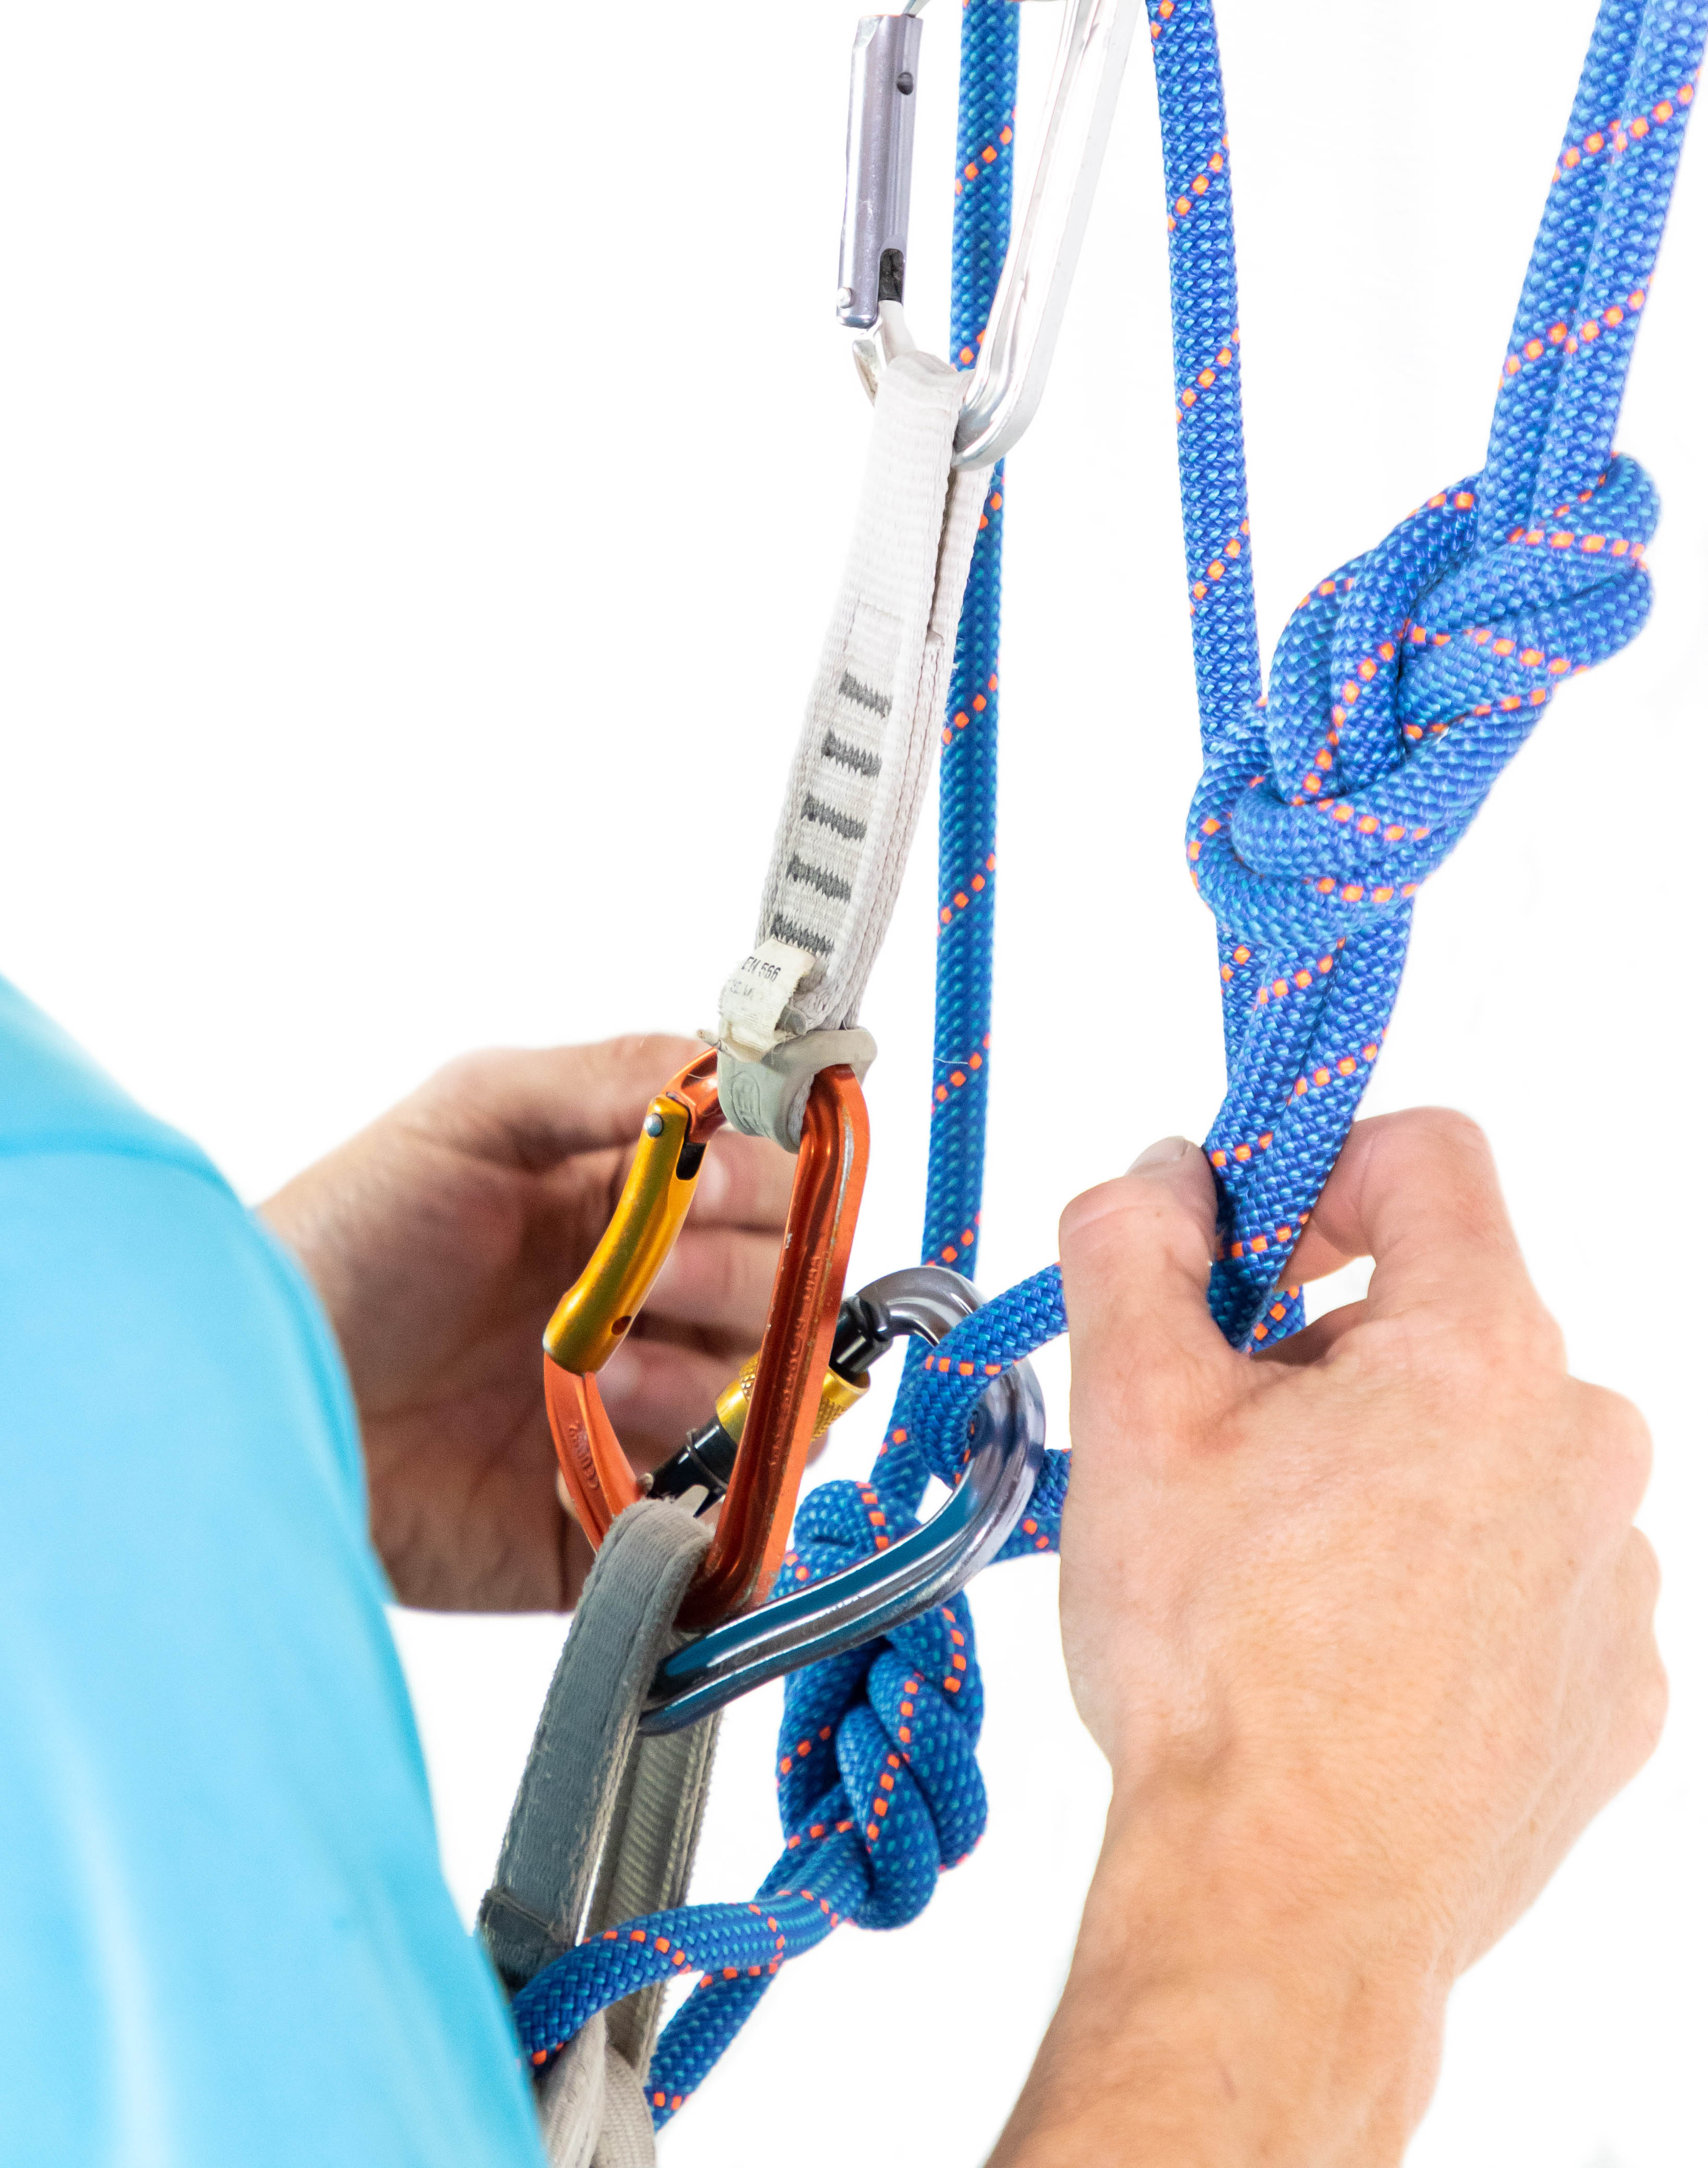 climber clipping figure 8 knot to harness with carabiner